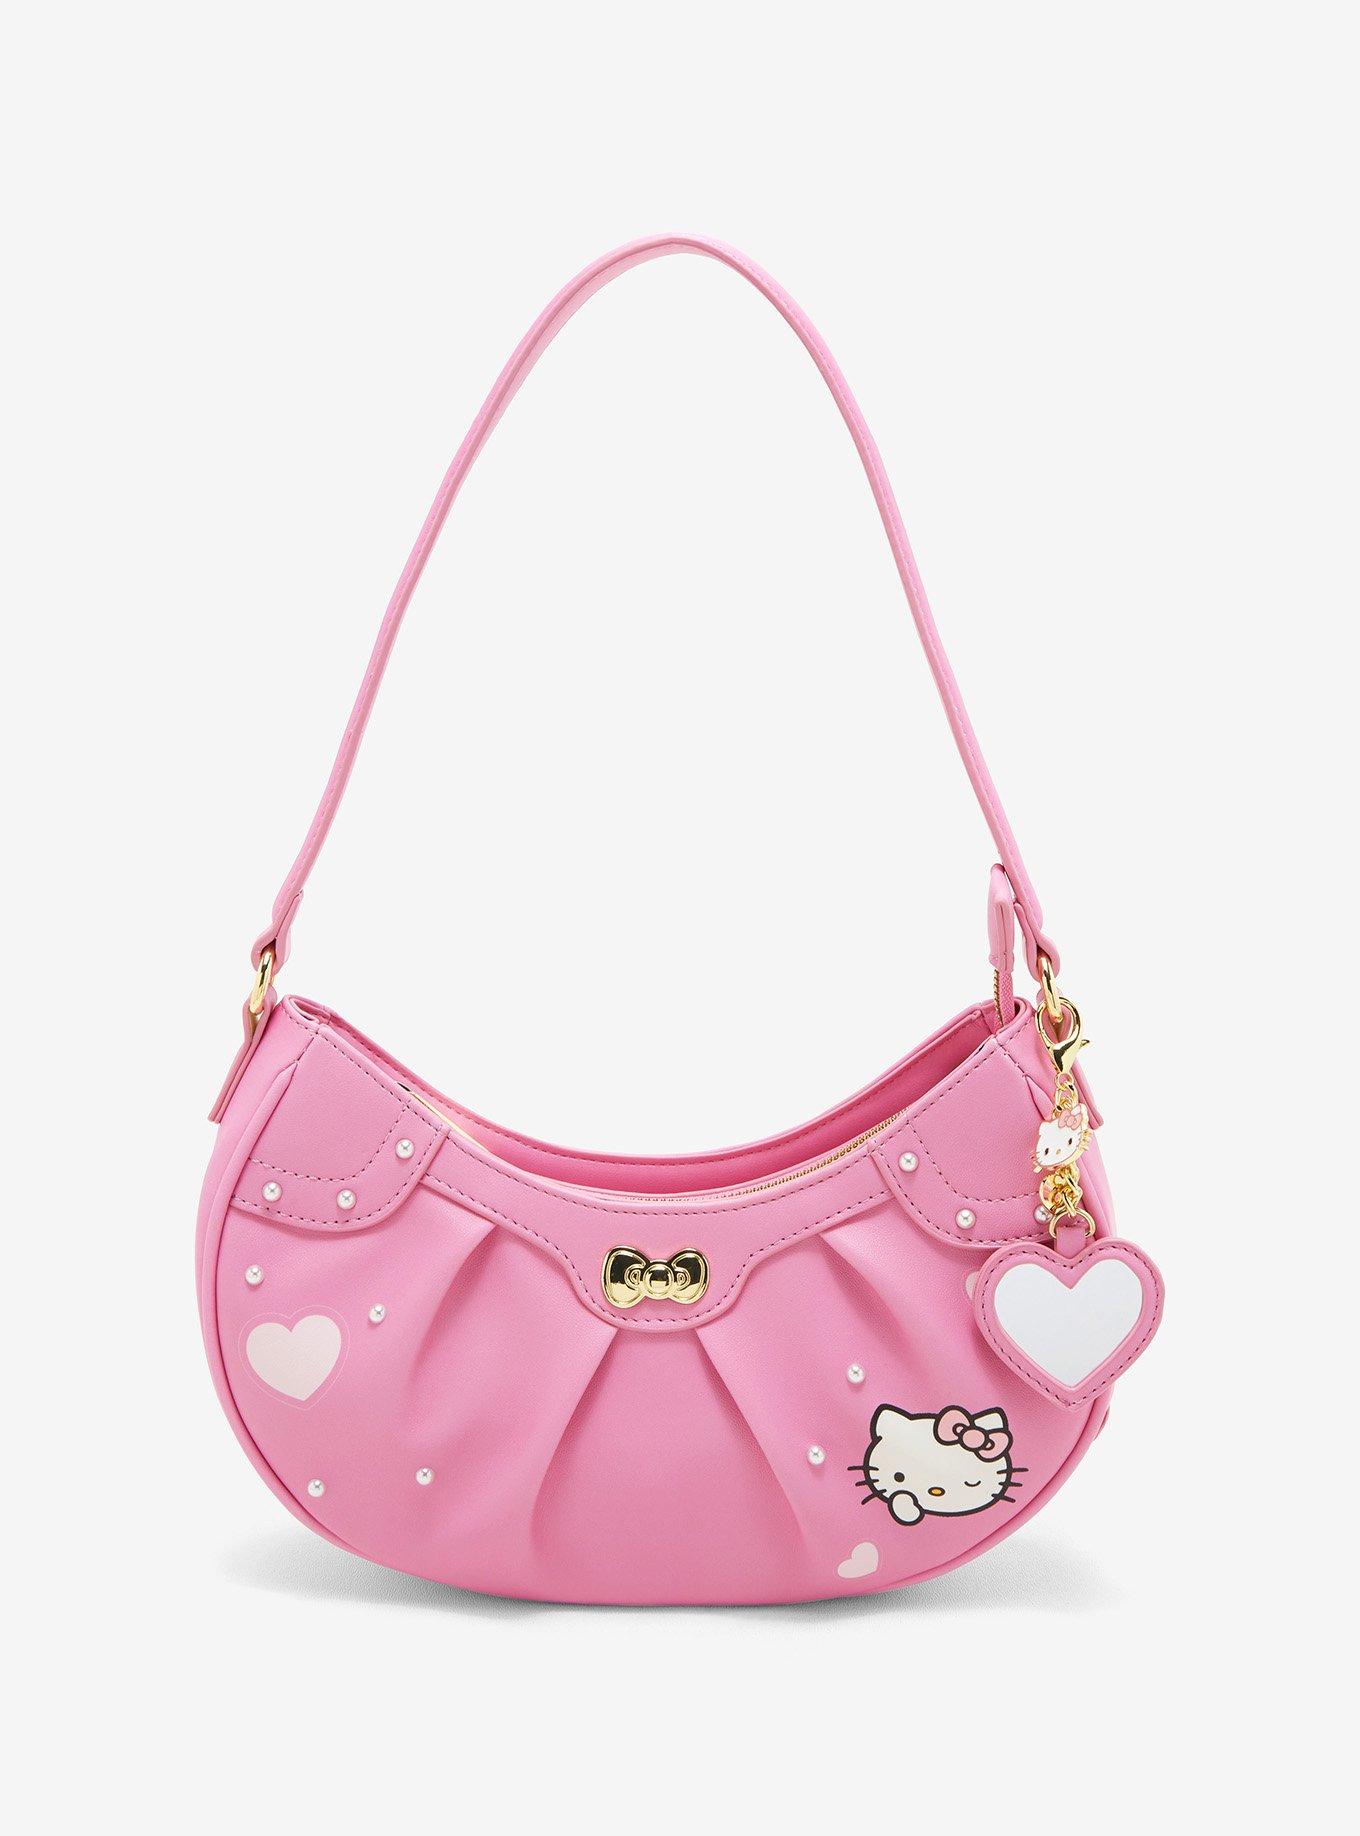 OFFICIAL Hello Kitty Bags